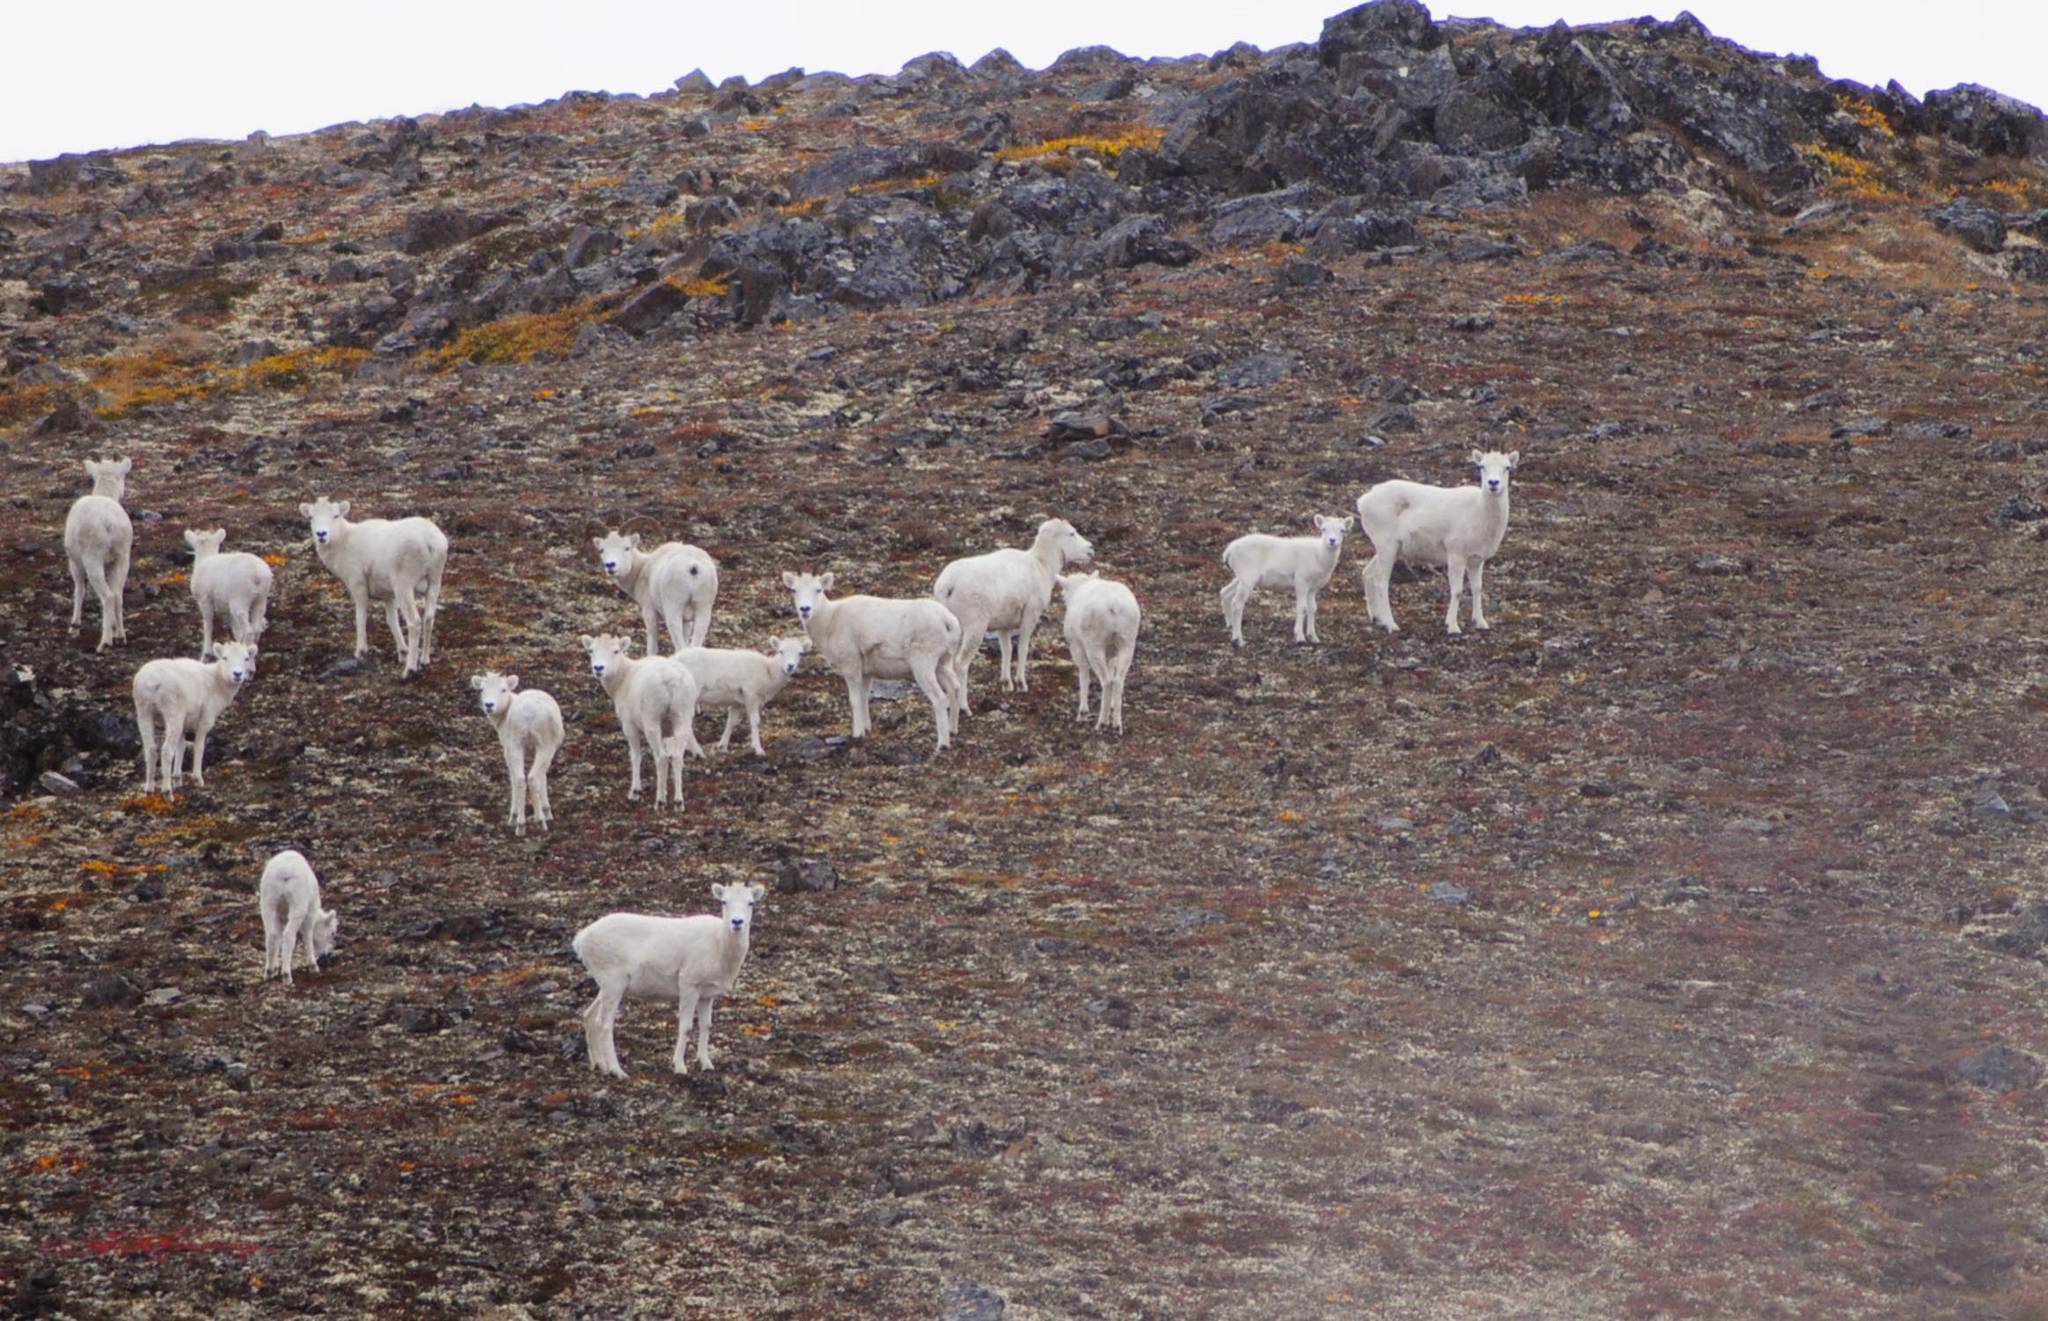 A herd of Dall sheep graze on the side of one of the peaks in the Mystery Hills above the Skyline Trail in September 2017 near Cooper Landing, Alaska. (Photo by Elizabeth Earl/Peninsula Clarion)